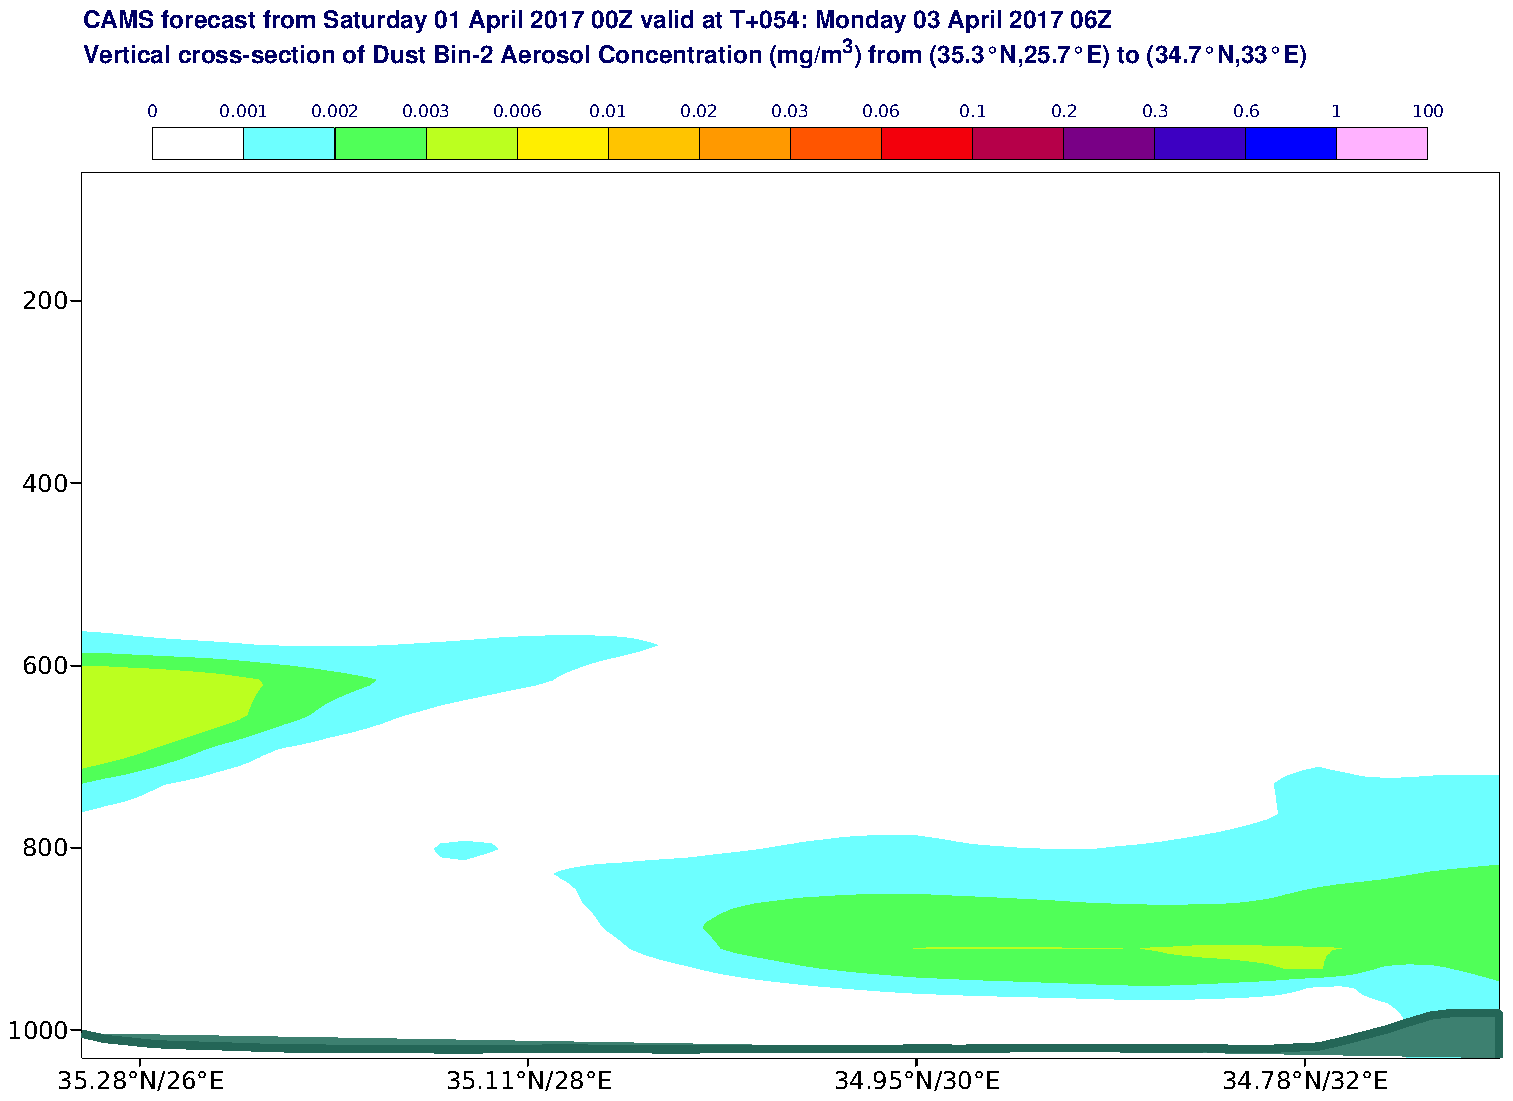 Vertical cross-section of Dust Bin-2 Aerosol Concentration (mg/m3) valid at T54 - 2017-04-03 06:00